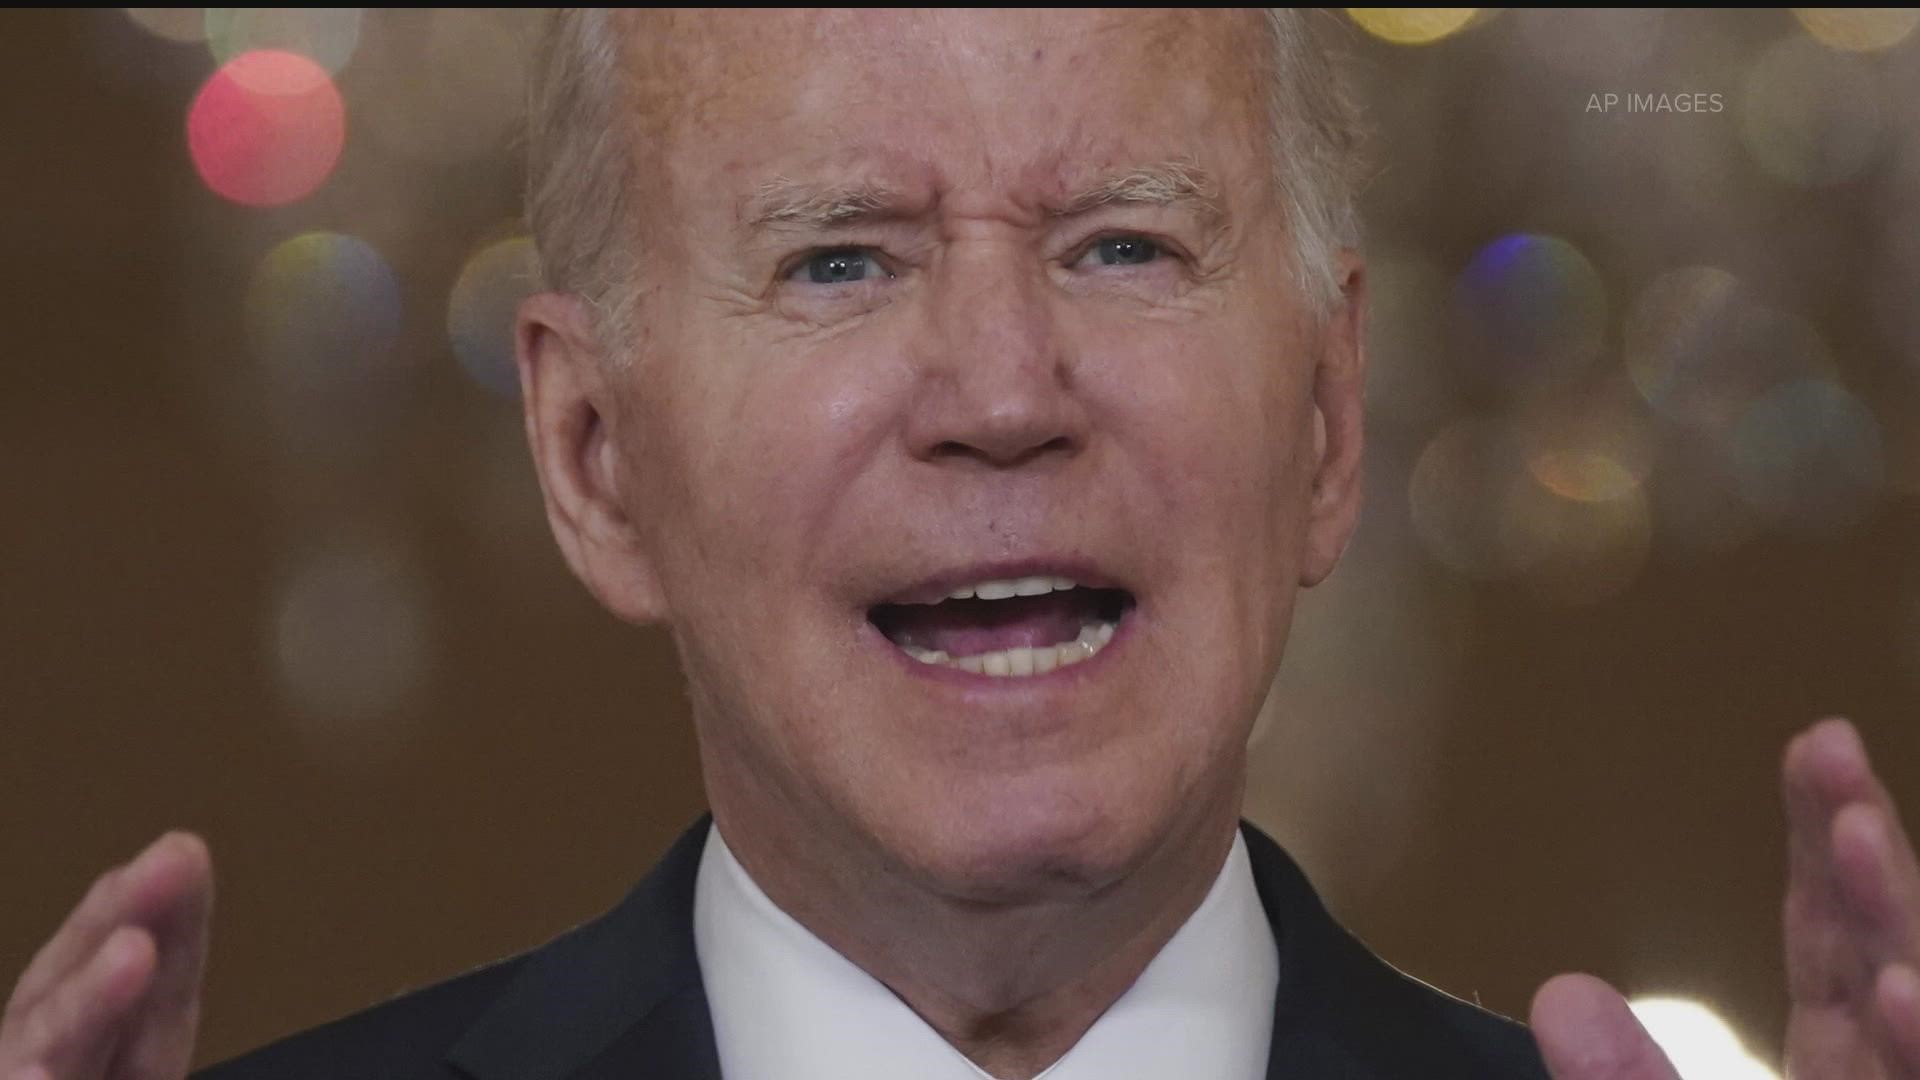 Biden said he's still waiting for more data while considering the pause.